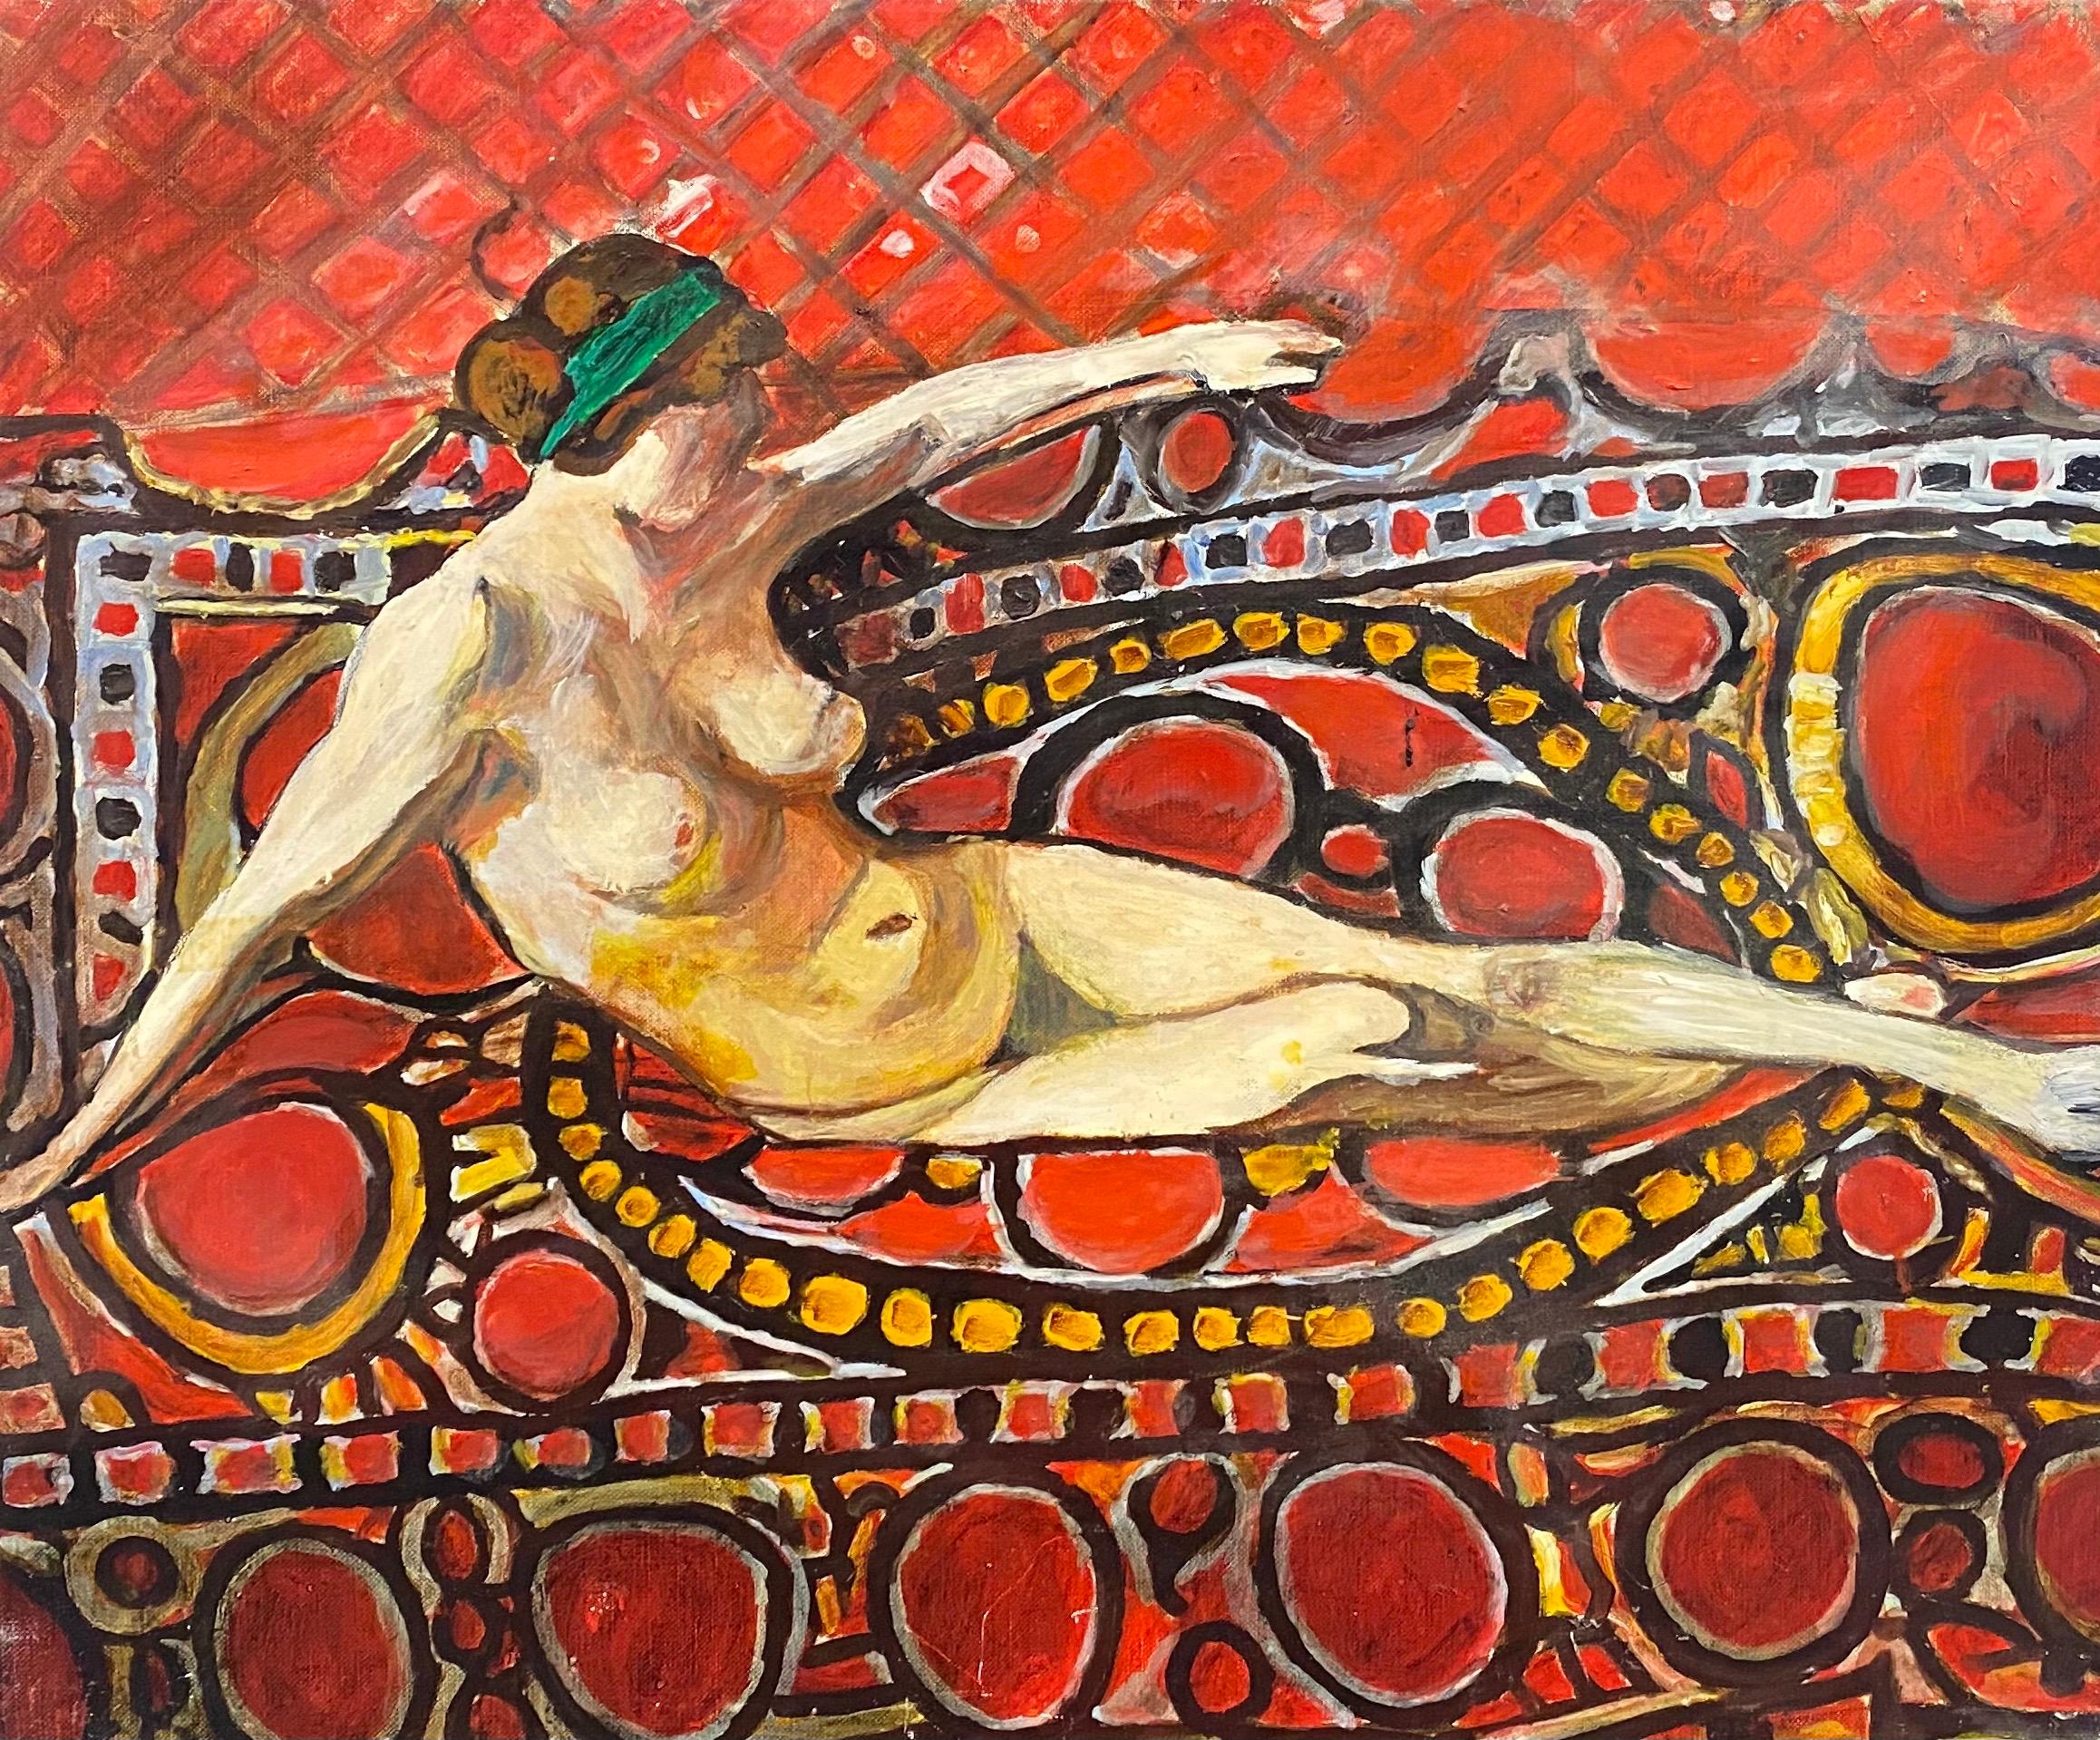 Unknown Nude Painting - Large French Colorist Modernist Oil Reclining Nude on Red Sofa. 1970's Oil